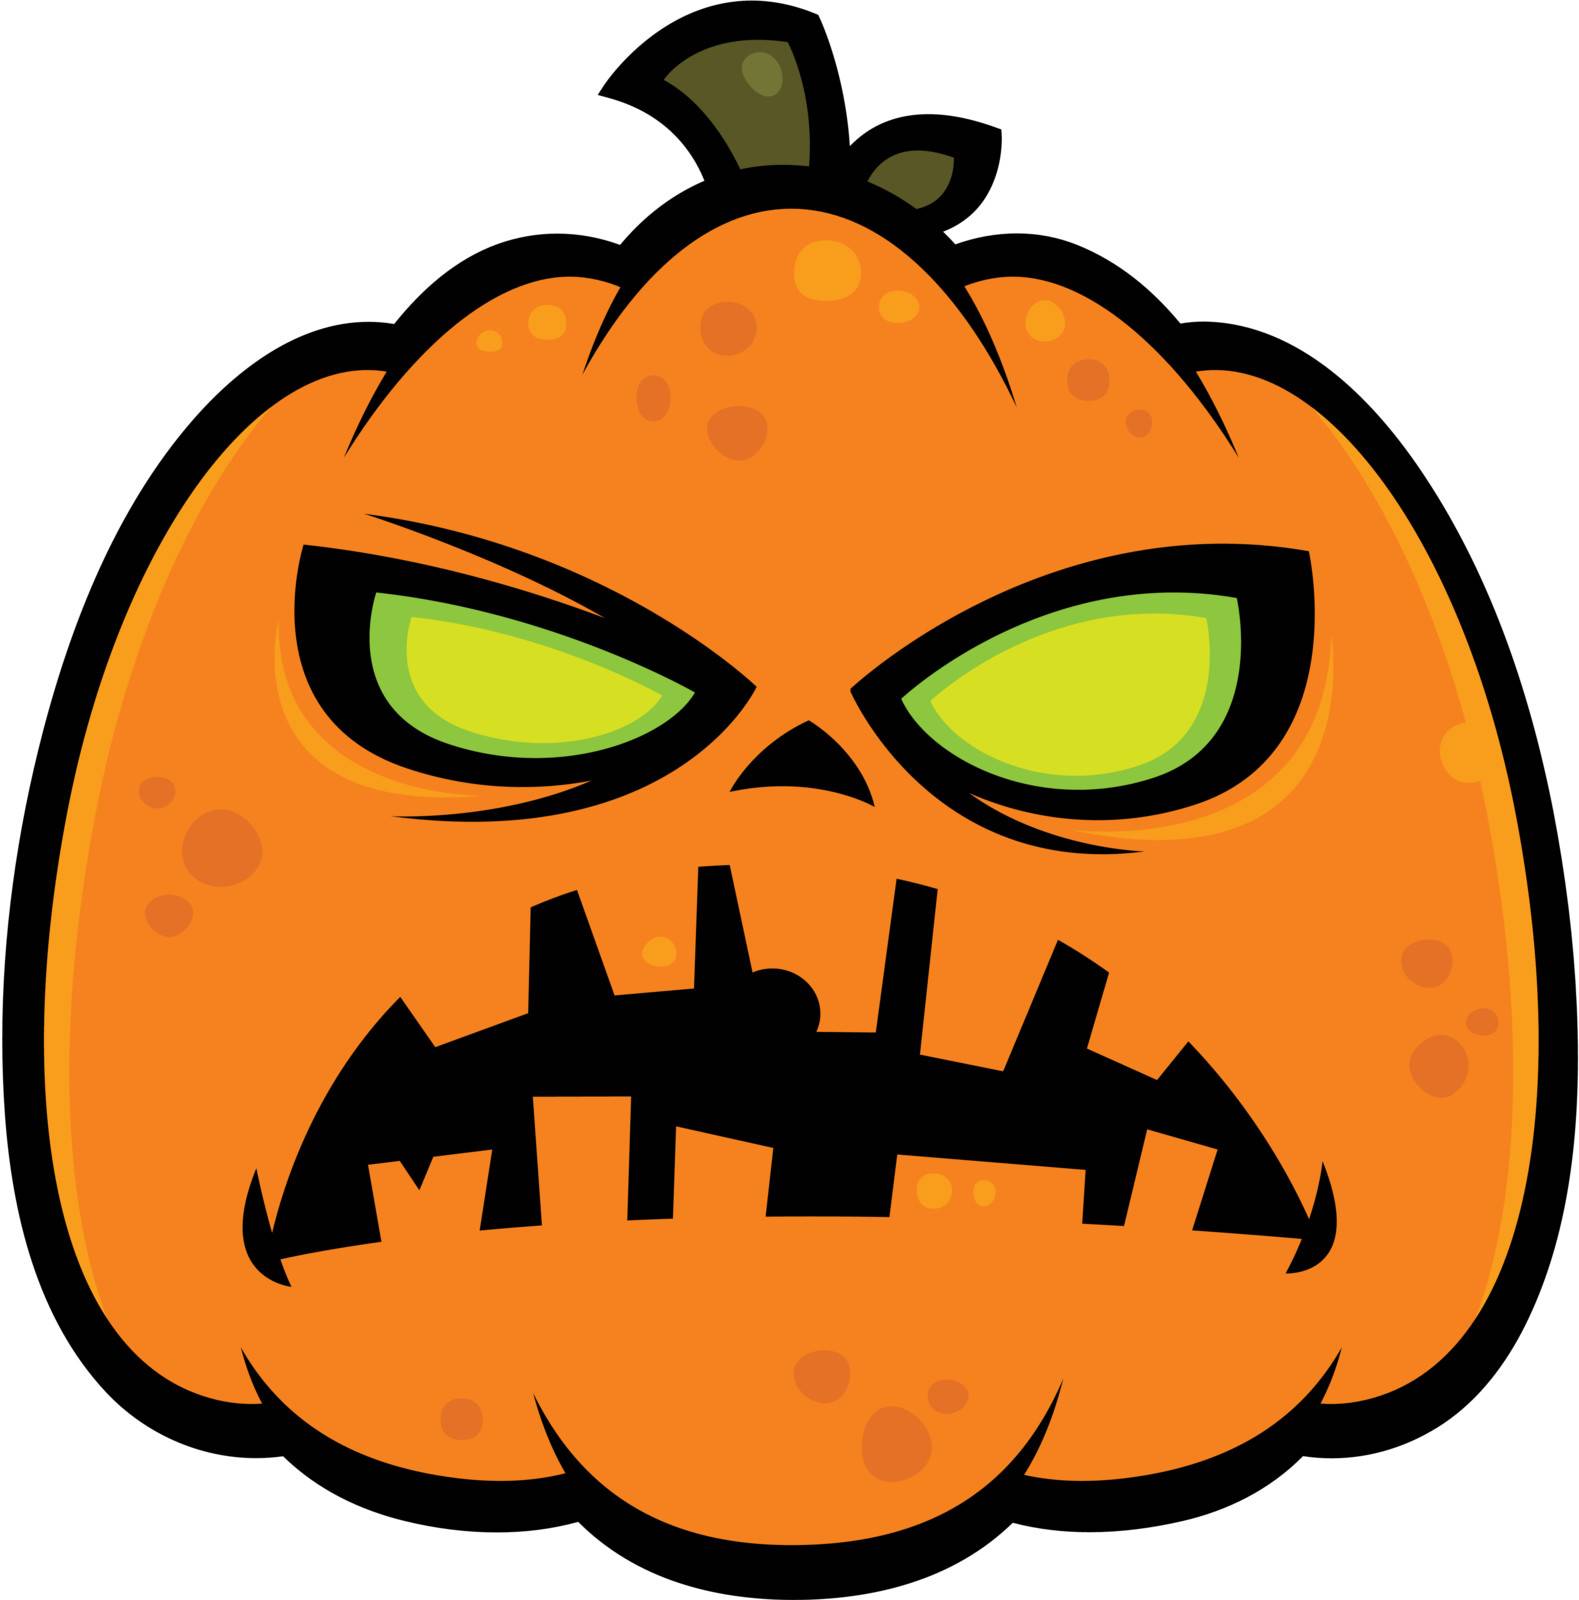 Cartoon illustration of a zombie pumpkin jack-o-lantern with green eyes. Great for Halloween.